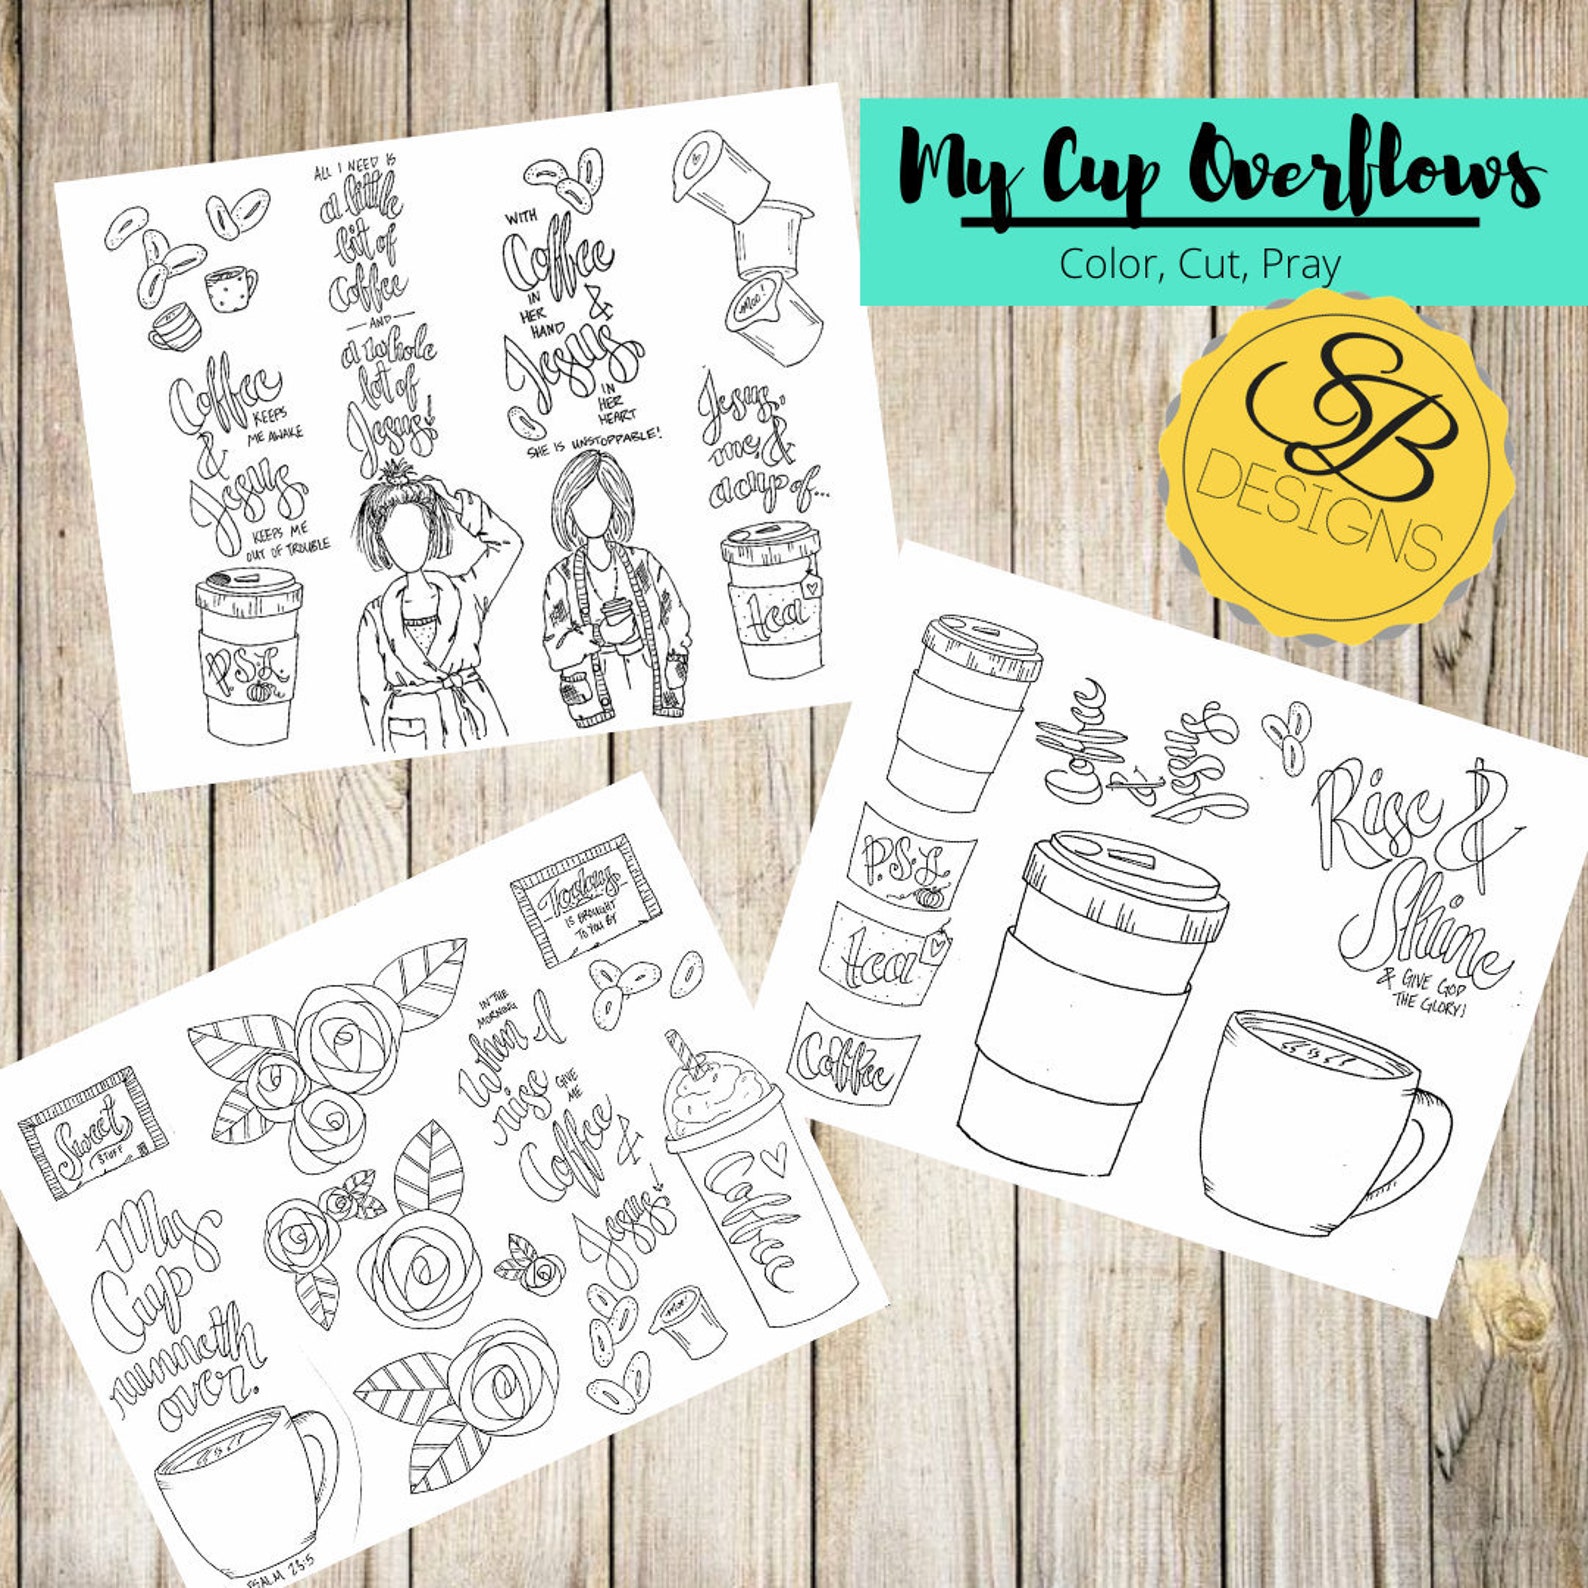 Printable 3-page My Cup Overflows color Cut Pray - Etsy